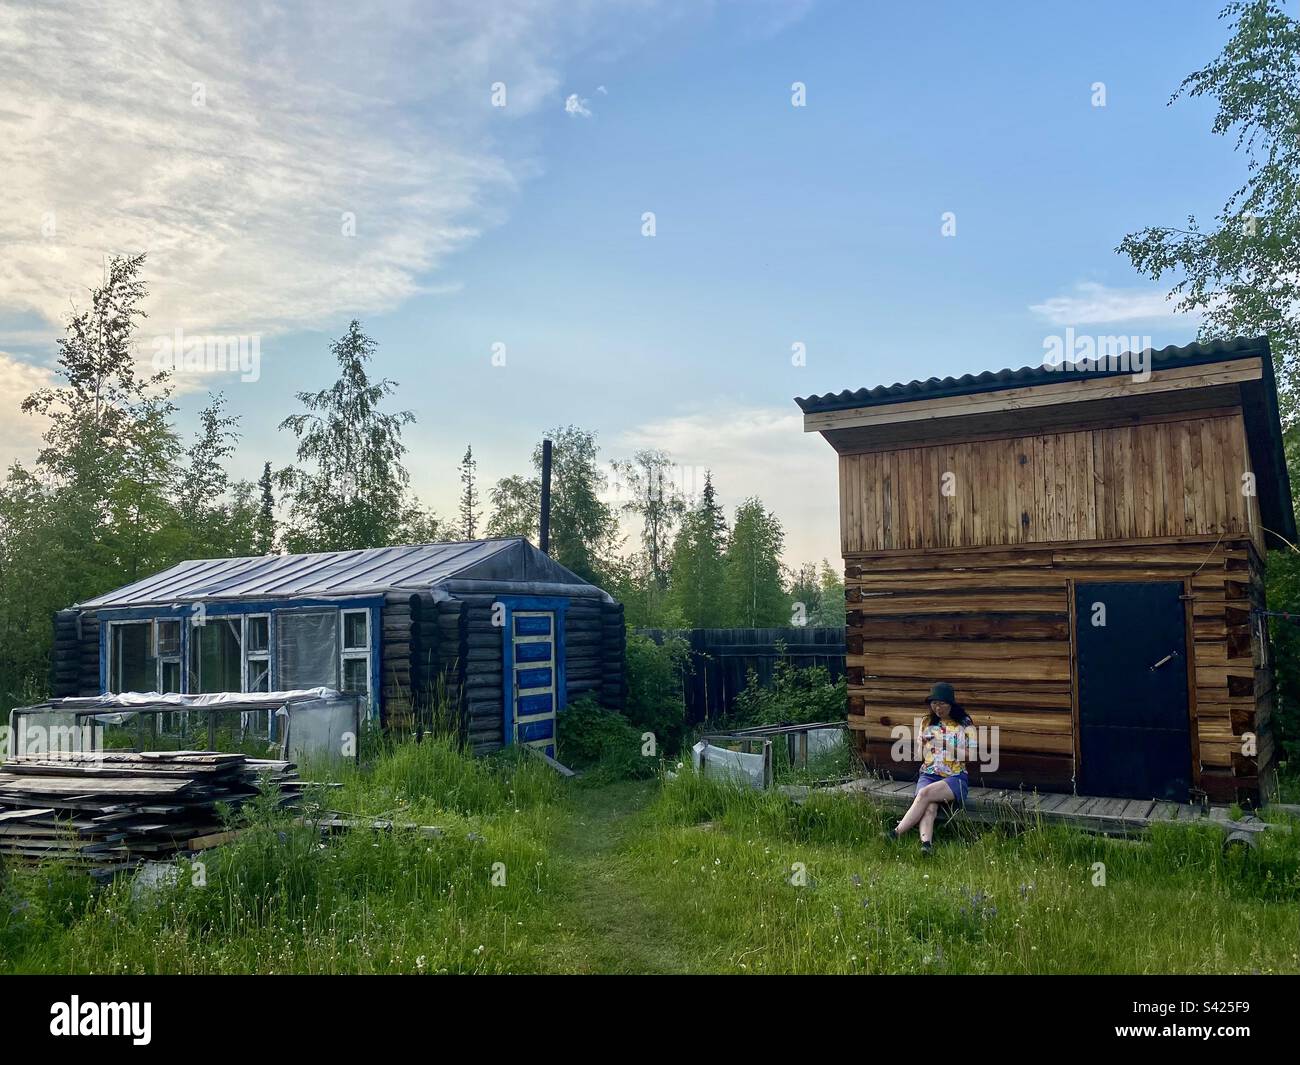 A Yakut girl is sitting looking at her phone on a garden plot in summer by a wooden bathhouse and a warm greenhouse among the grass. Stock Photo